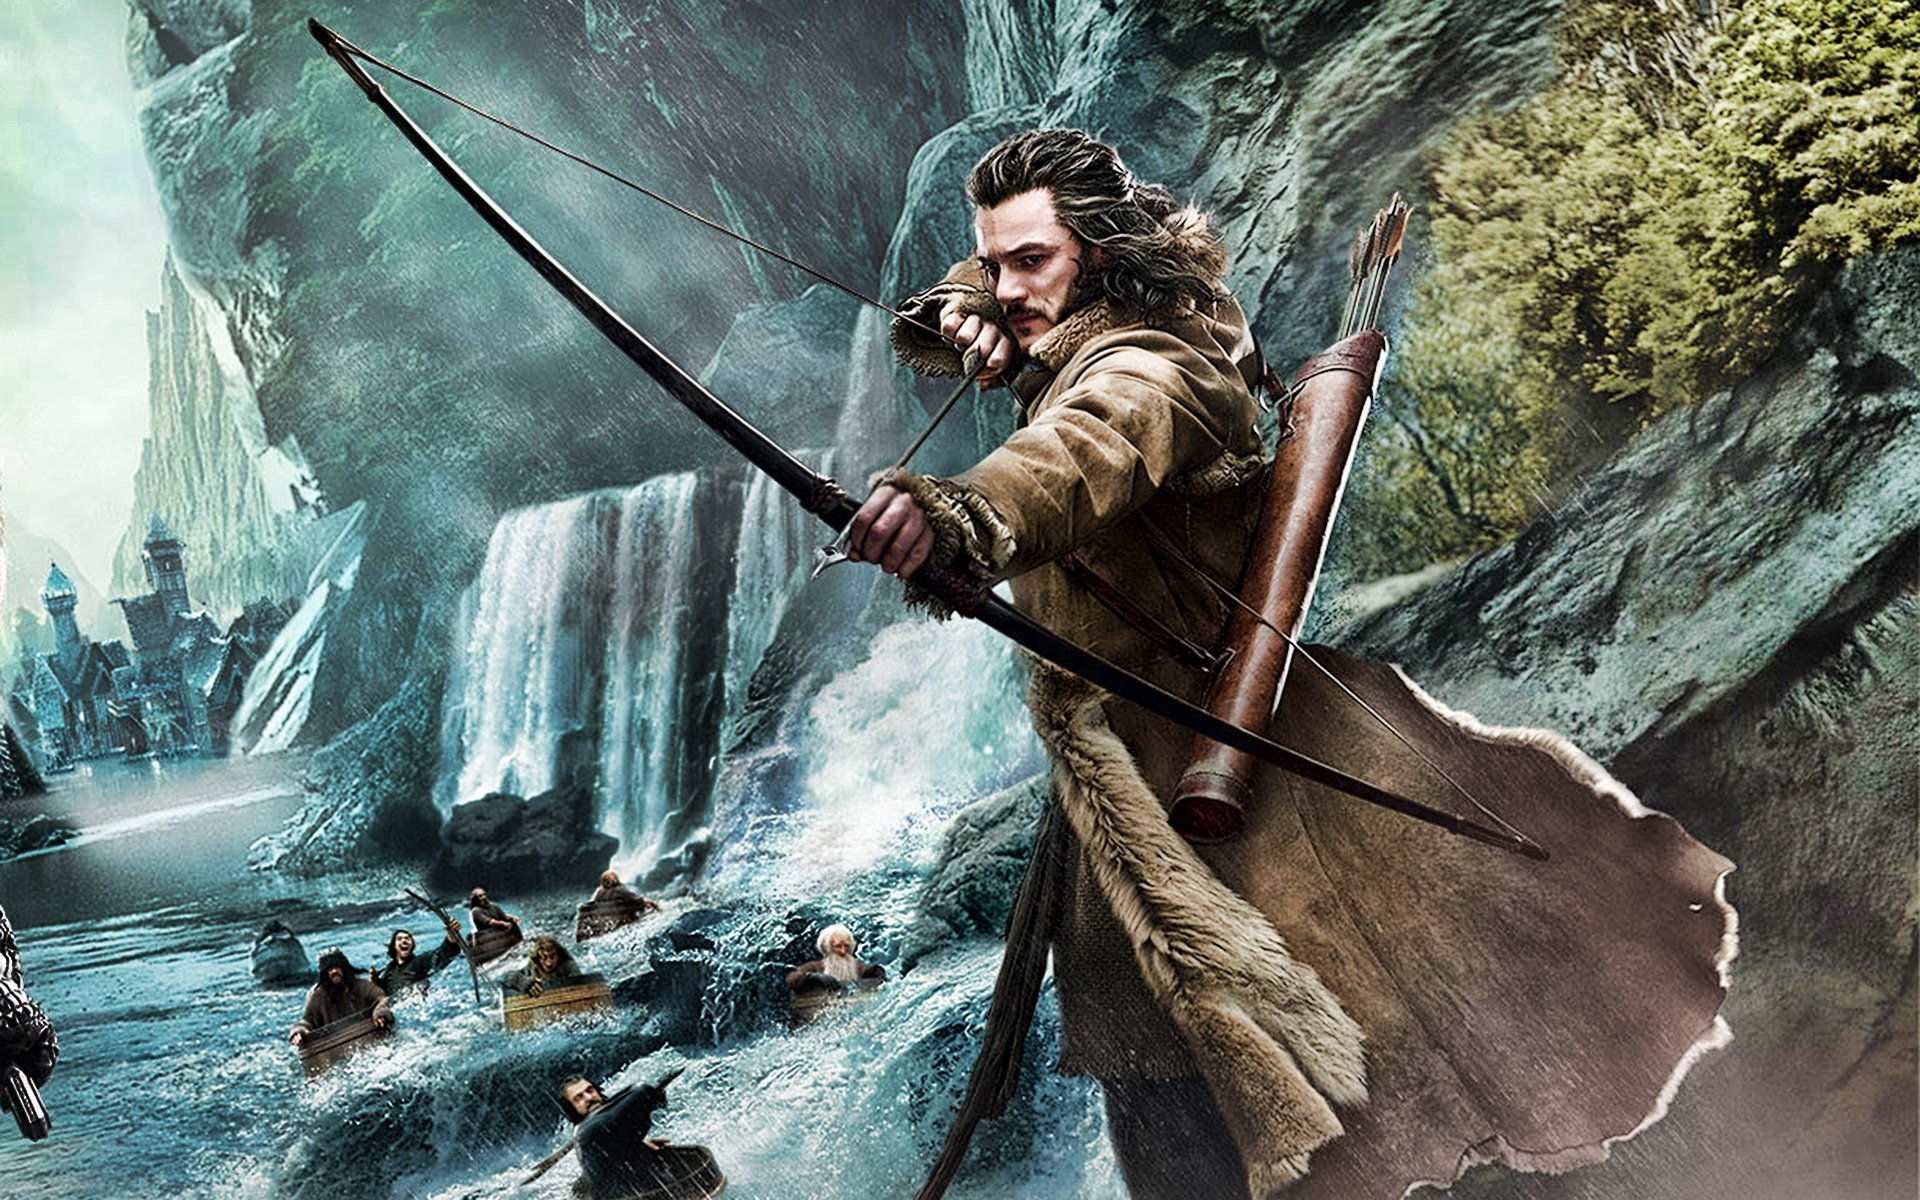 Bard the Bowman, Desolation of Smaug, Courageous defender, Thrilling adventure, 1920x1200 HD Desktop